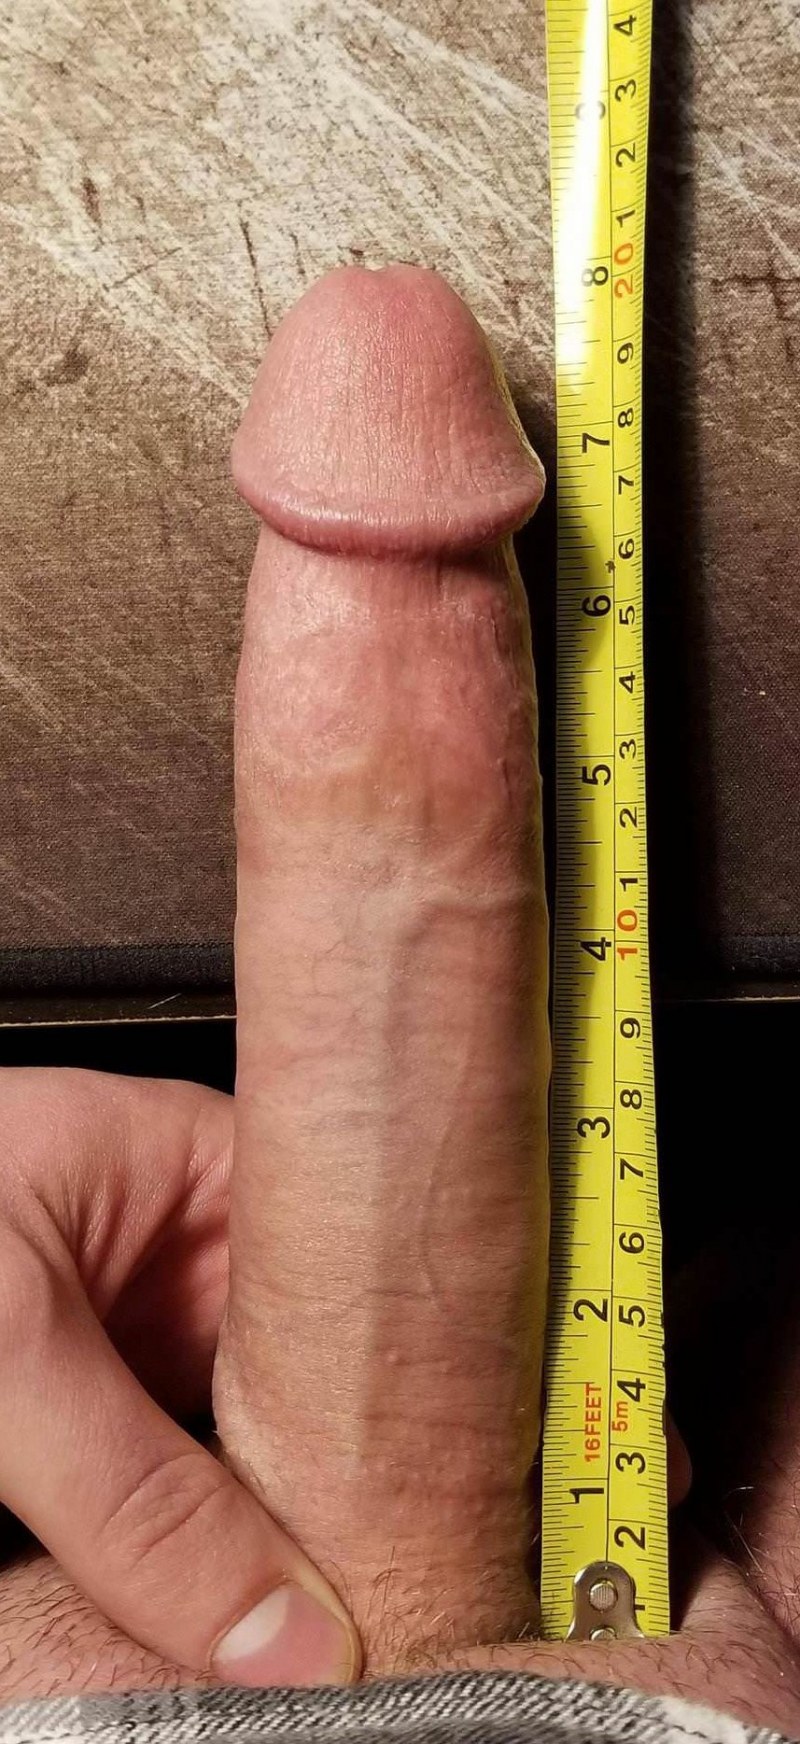 Dick size 5.5 inch